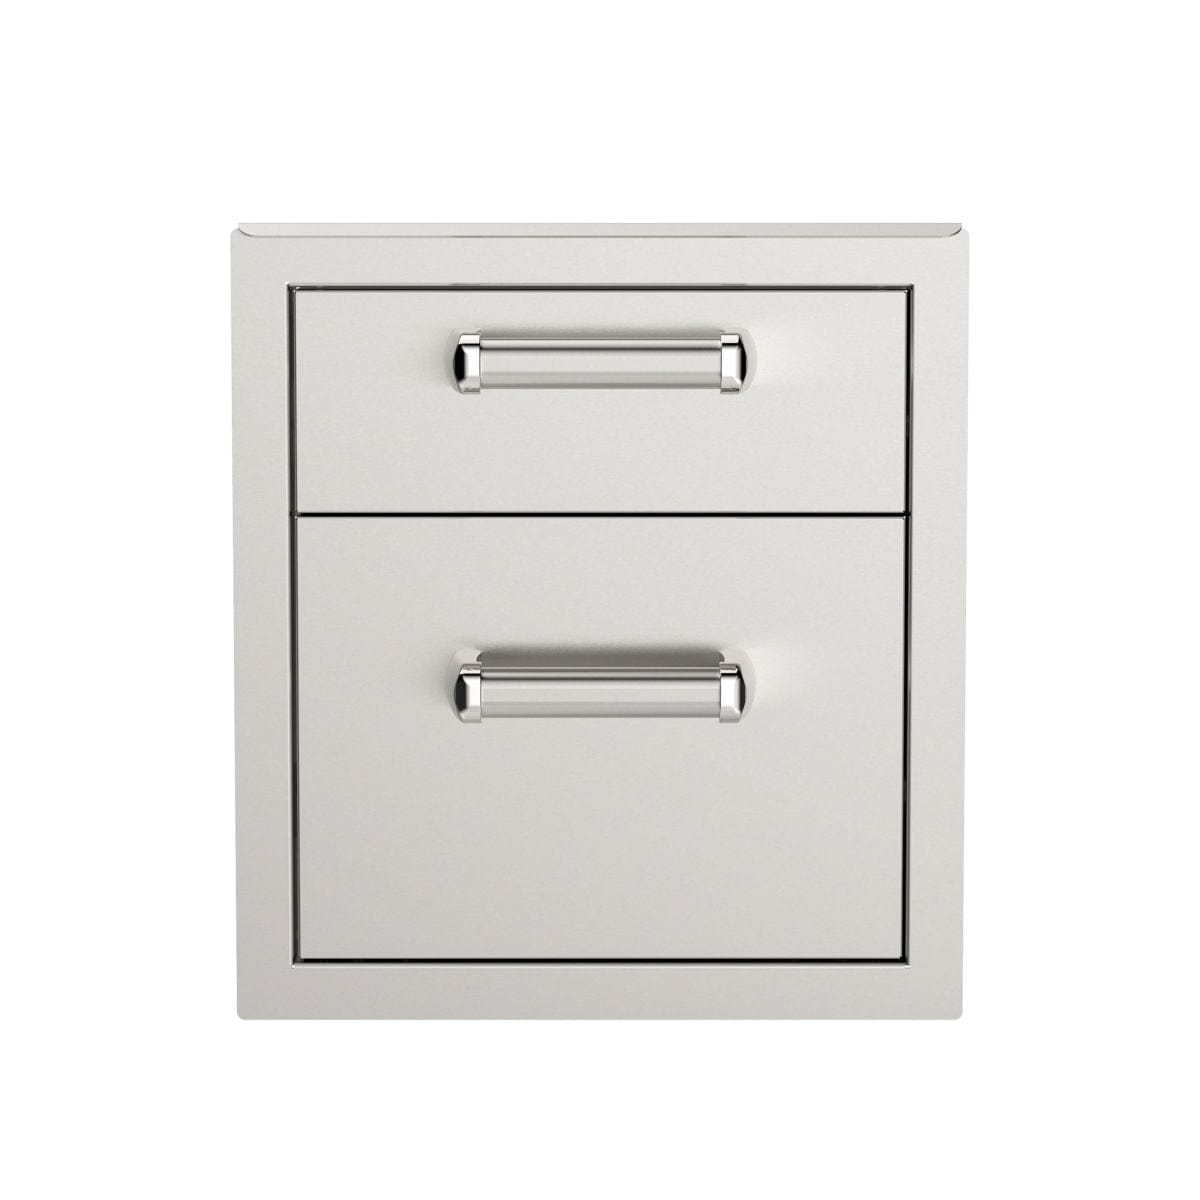 Fire Magic Double Drawer - Kitchen King Direct